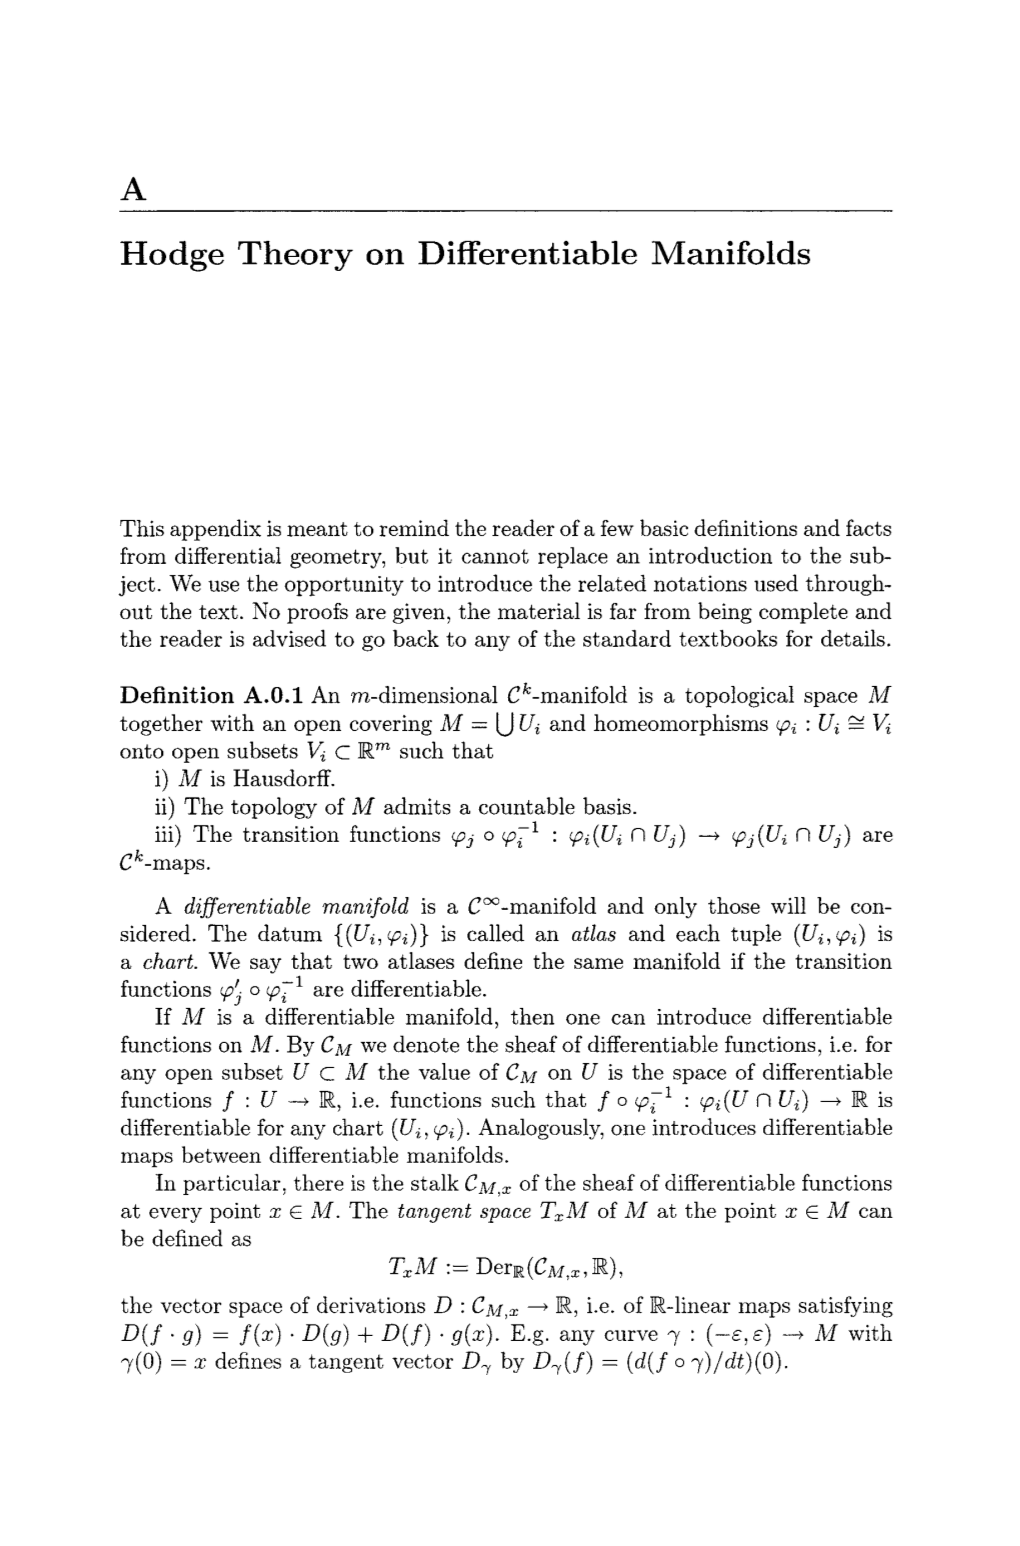 Hodge Theory on Differentiable Manifolds